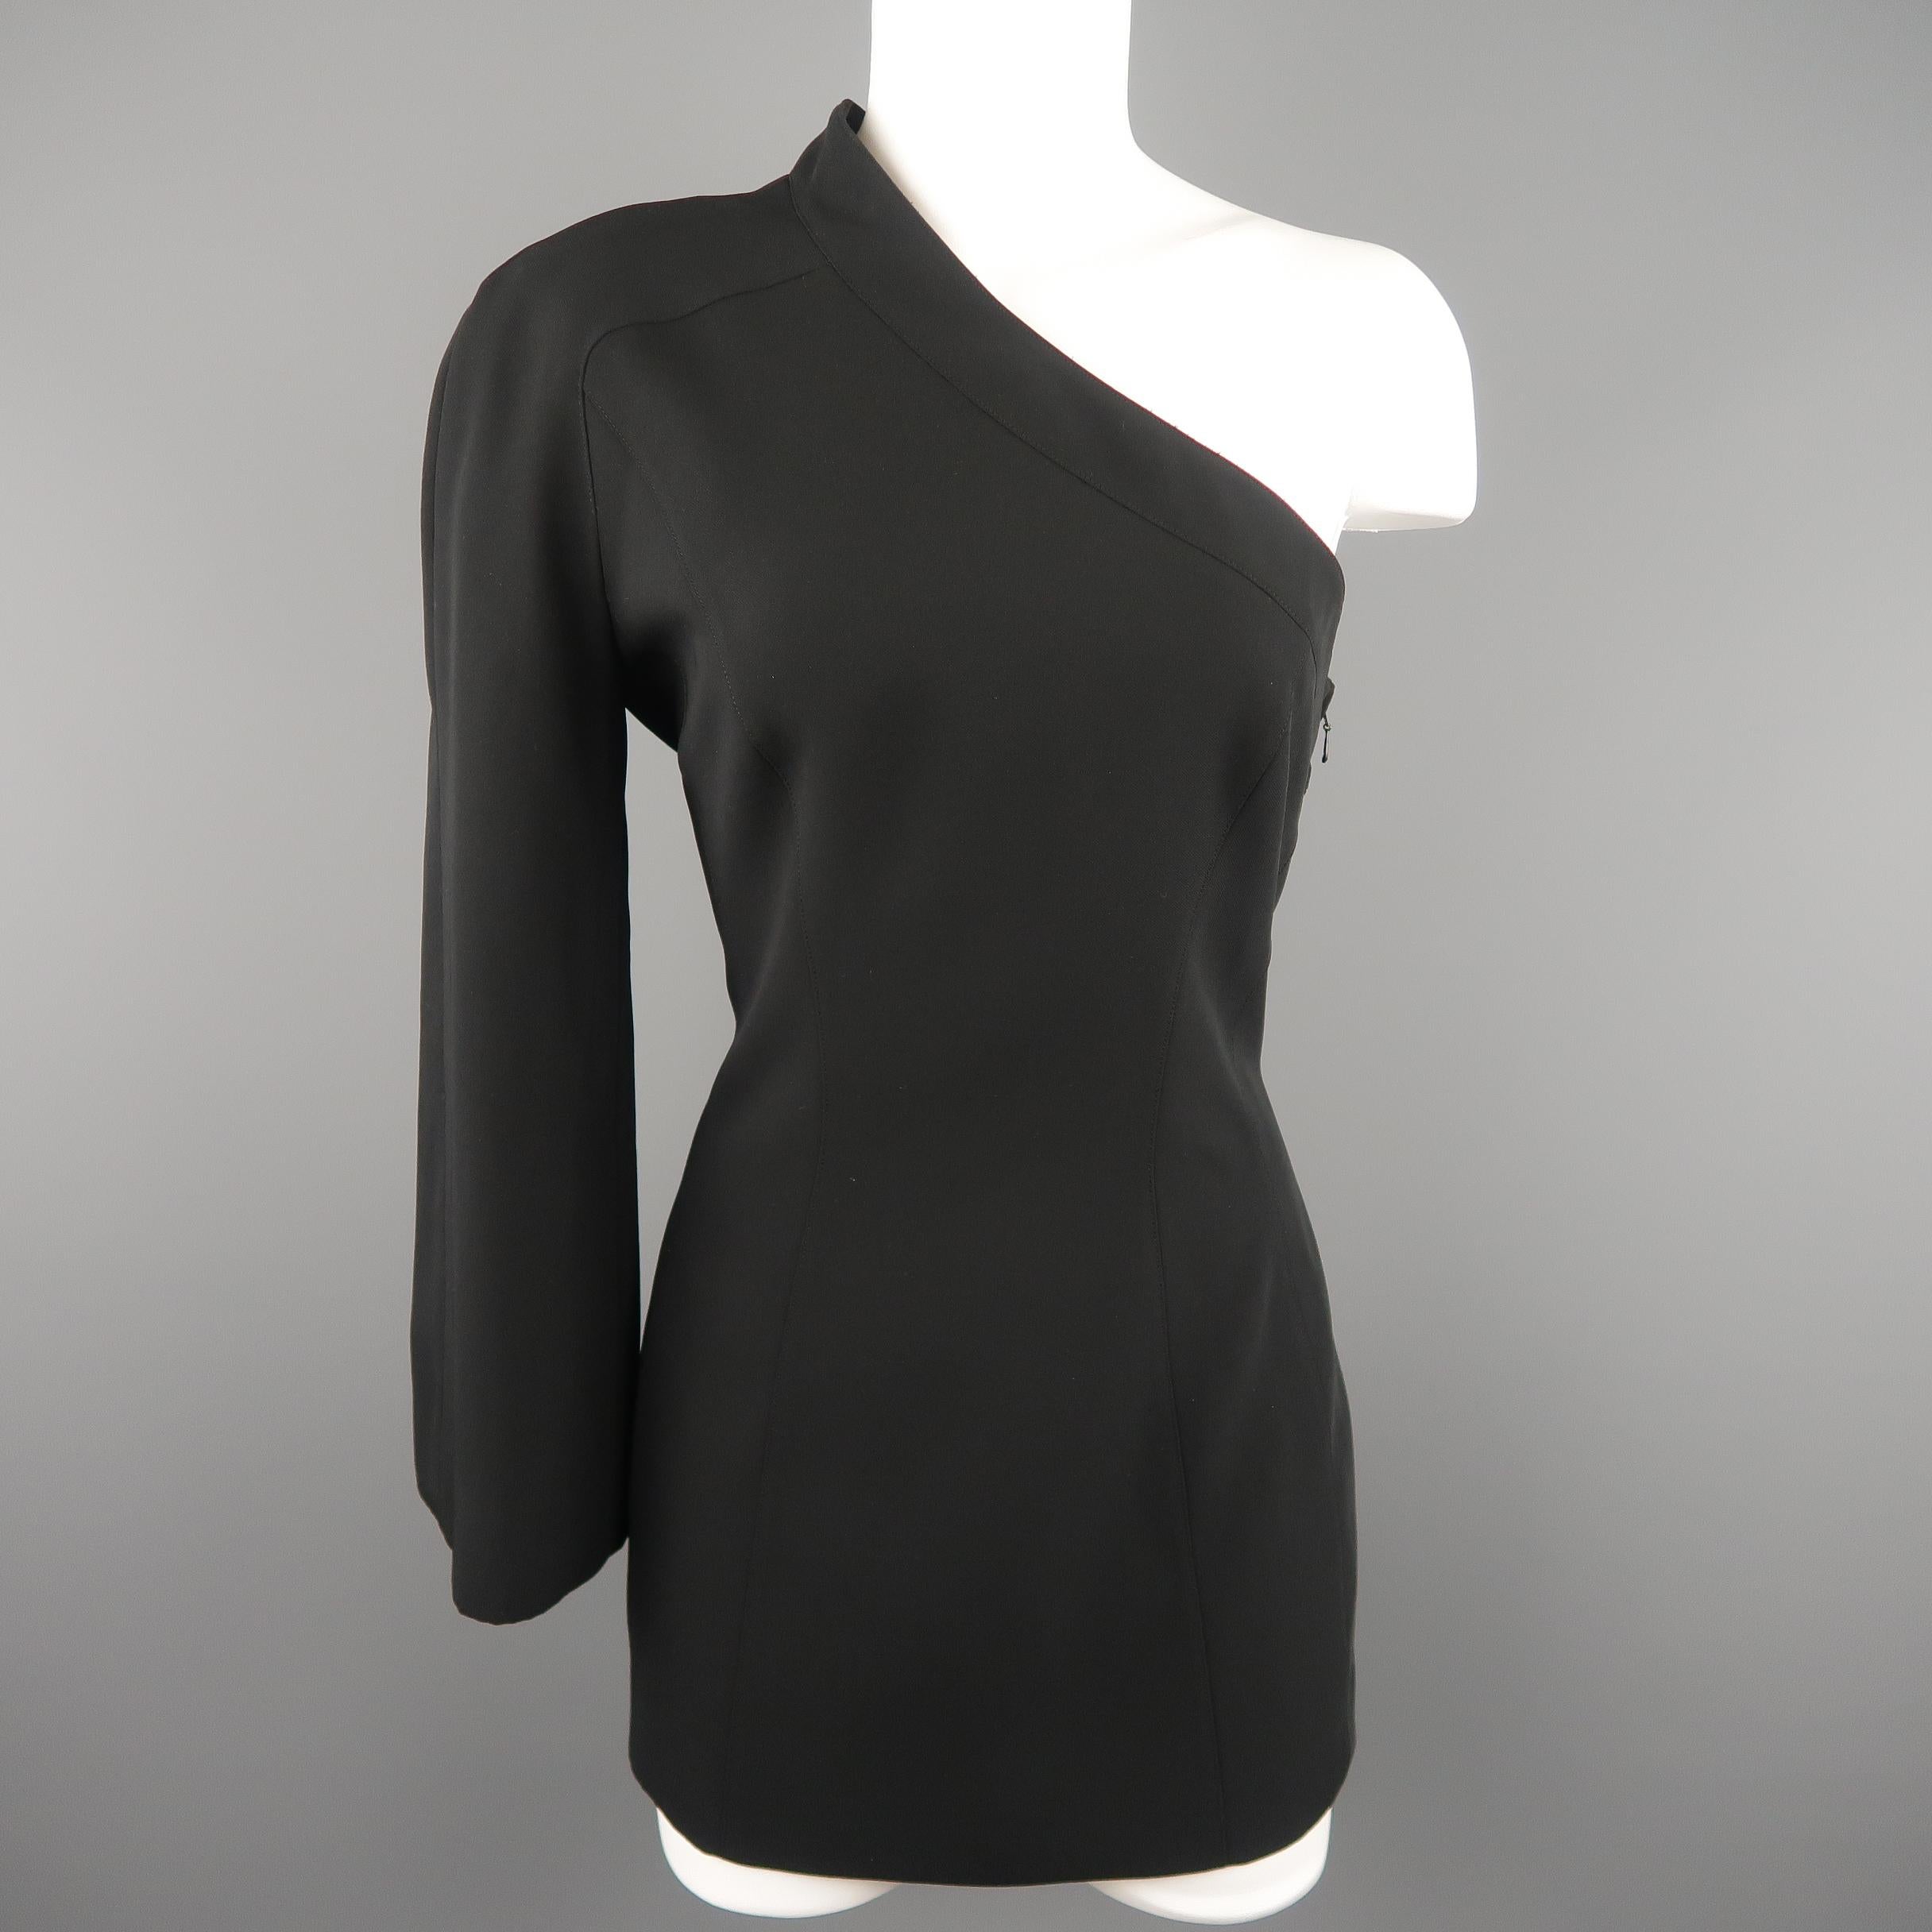 MUGLER by Thierry Mugler Circa 2000 mini dress comes in black twill with a V neckline, long sleeves, fitted silhouette, side zip and half snap off sleeve panel for an asymmetrical one shoulder look. Made in Hungary.
 
Excellent Pre-Owned Condition.